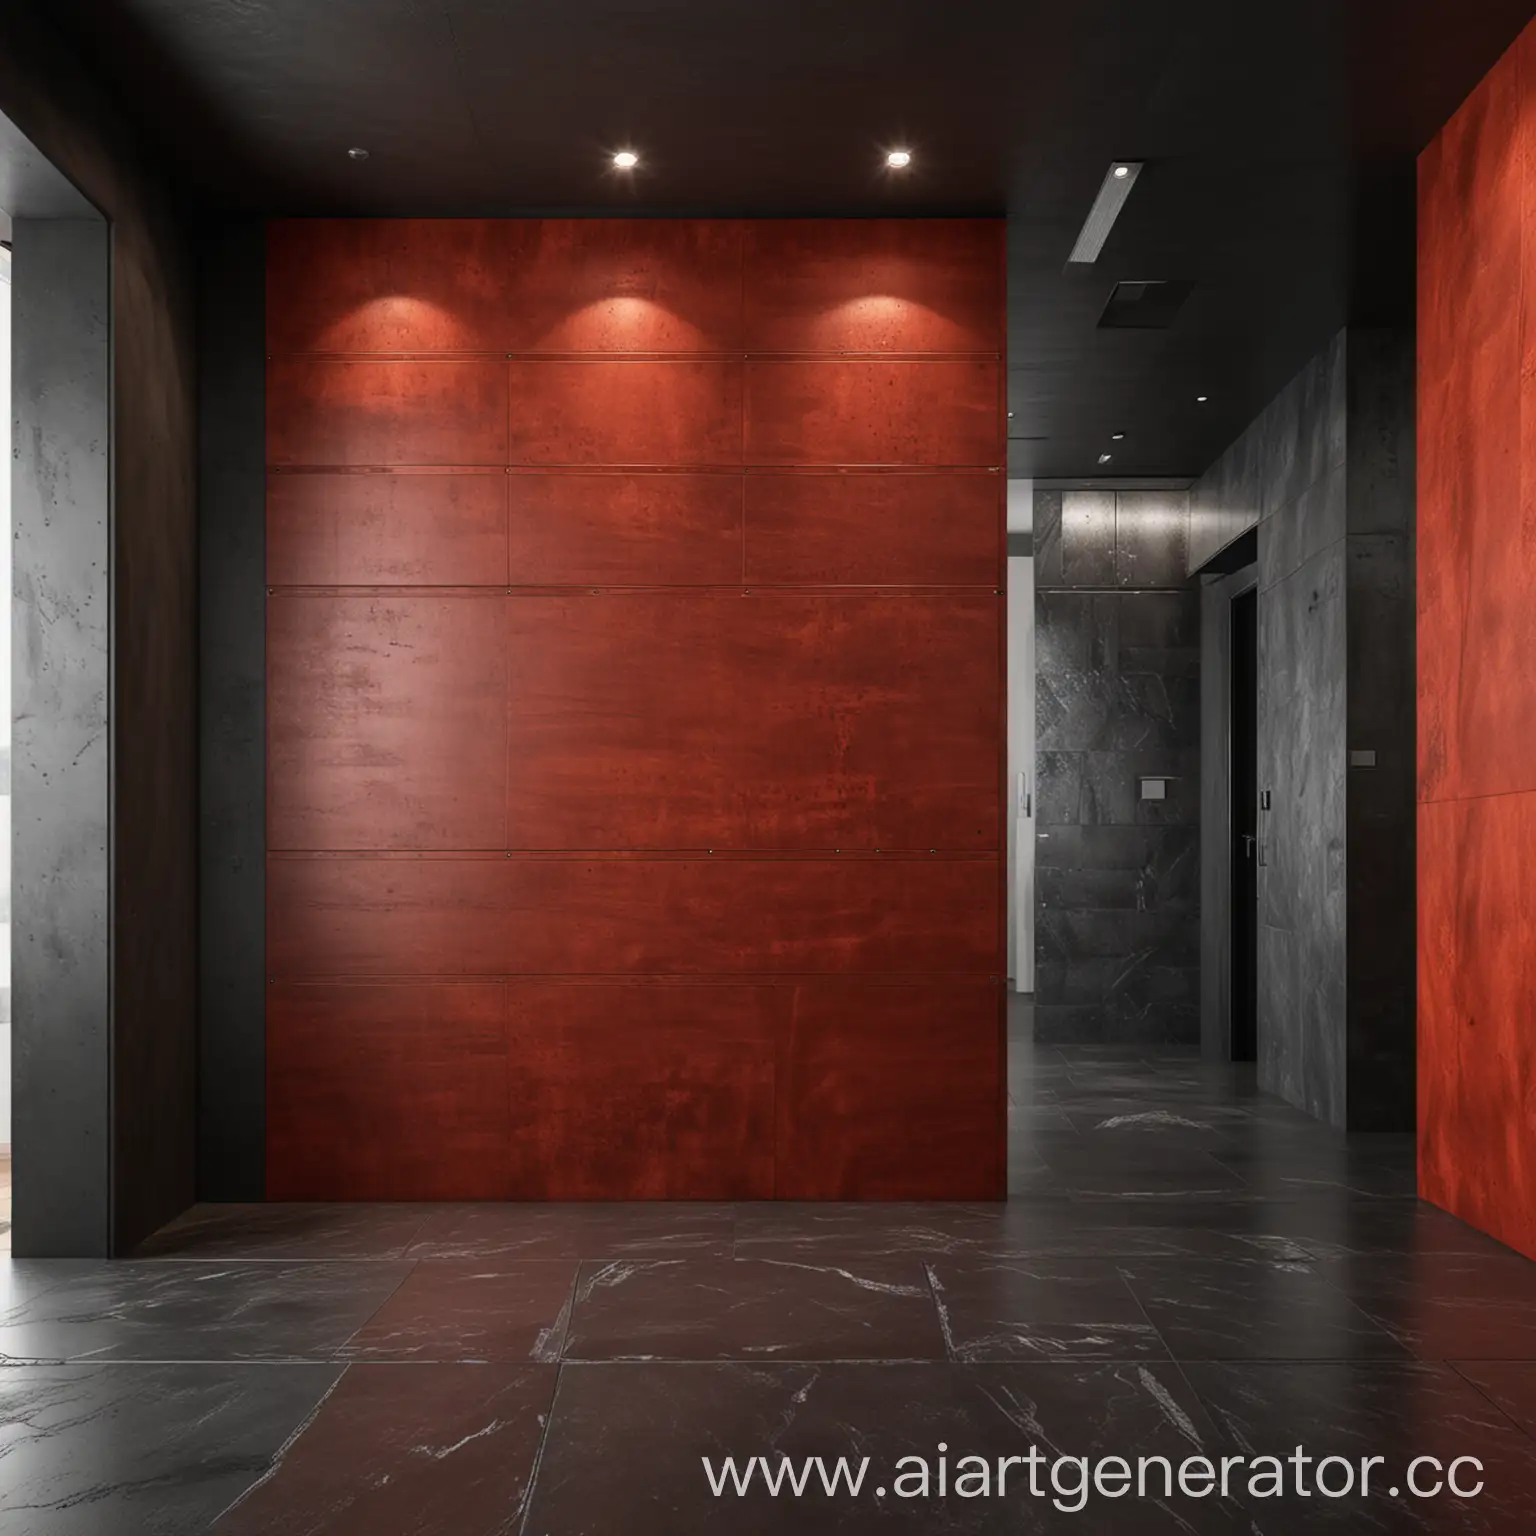 Modern-Interior-Design-with-Red-Wood-Panels-and-Metal-Accents